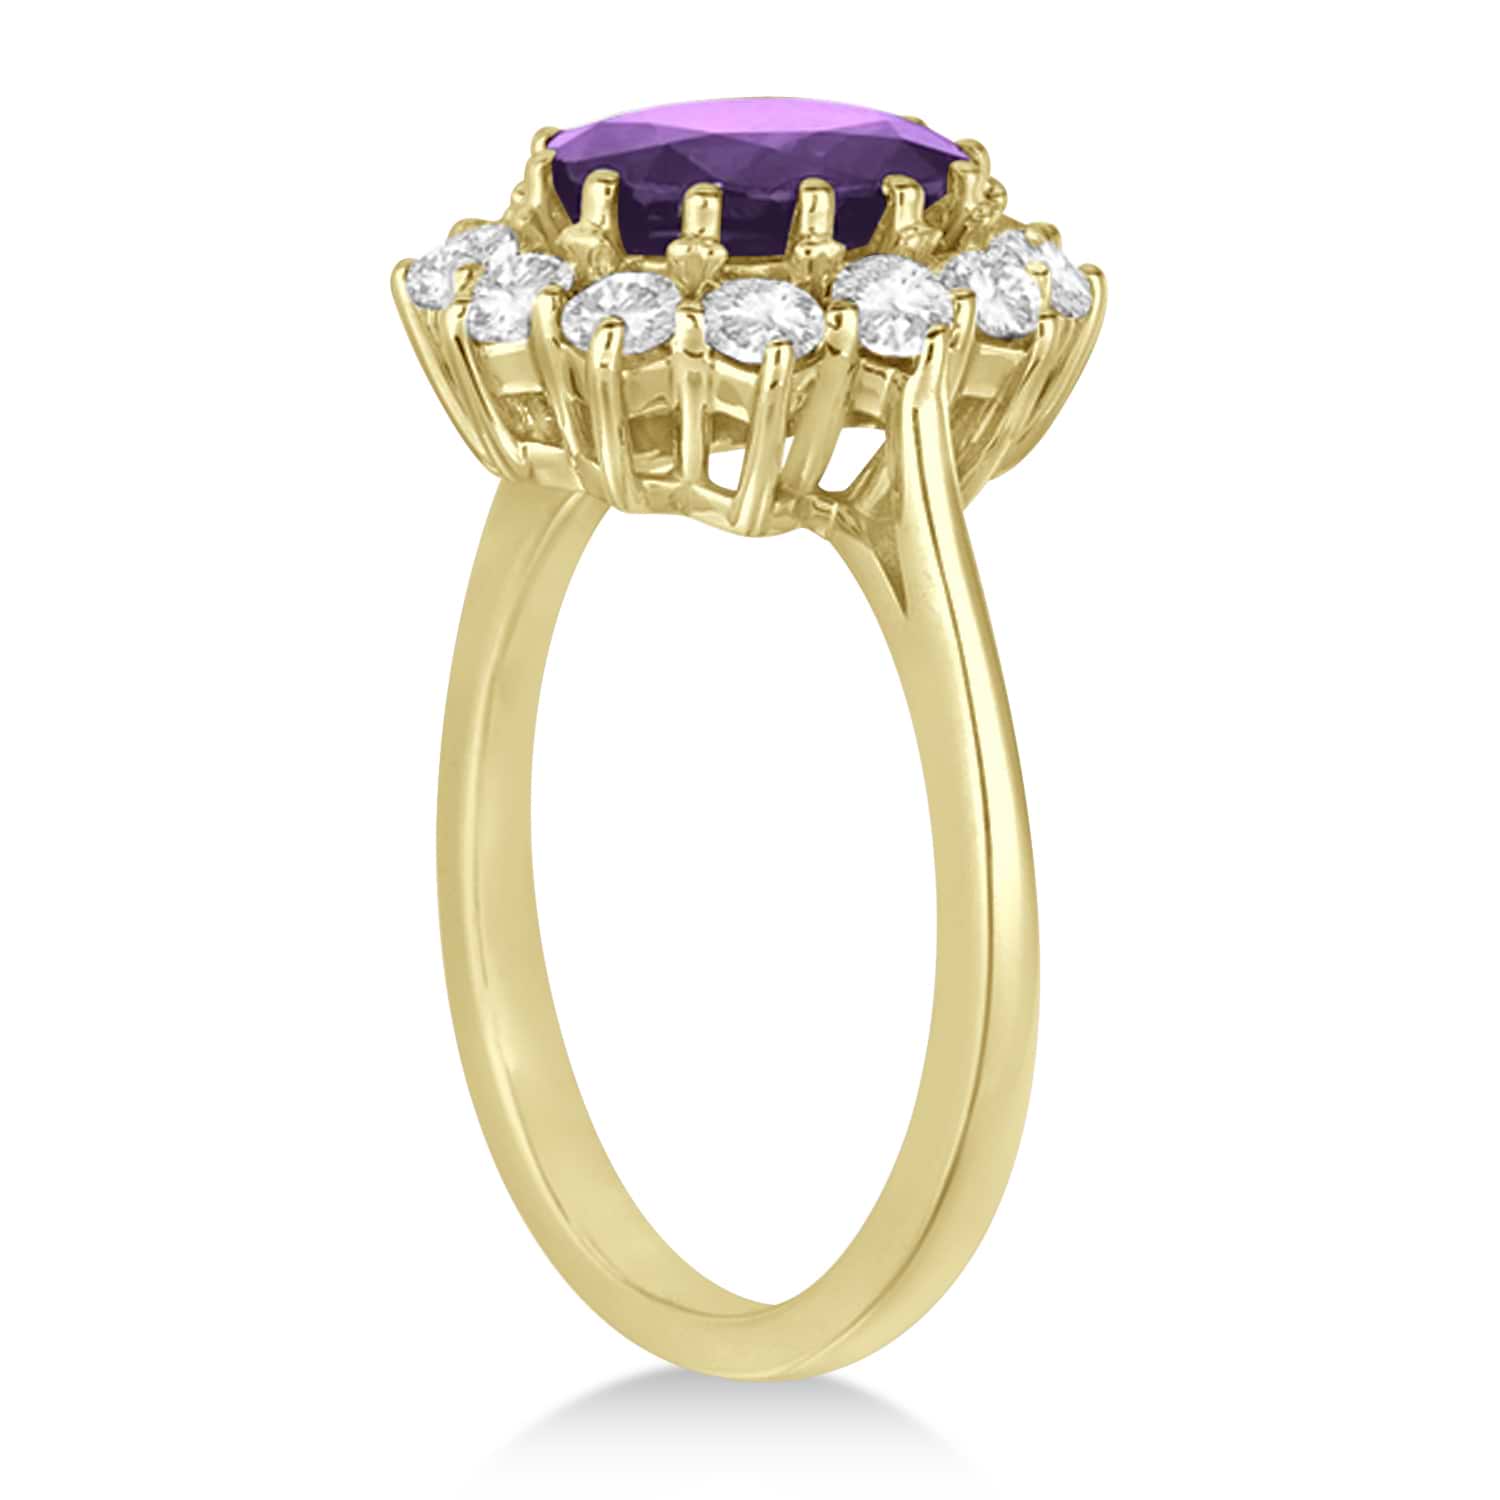 Oval Amethyst & Diamond Accented Ring in 18k Yellow Gold (3.60ctw)